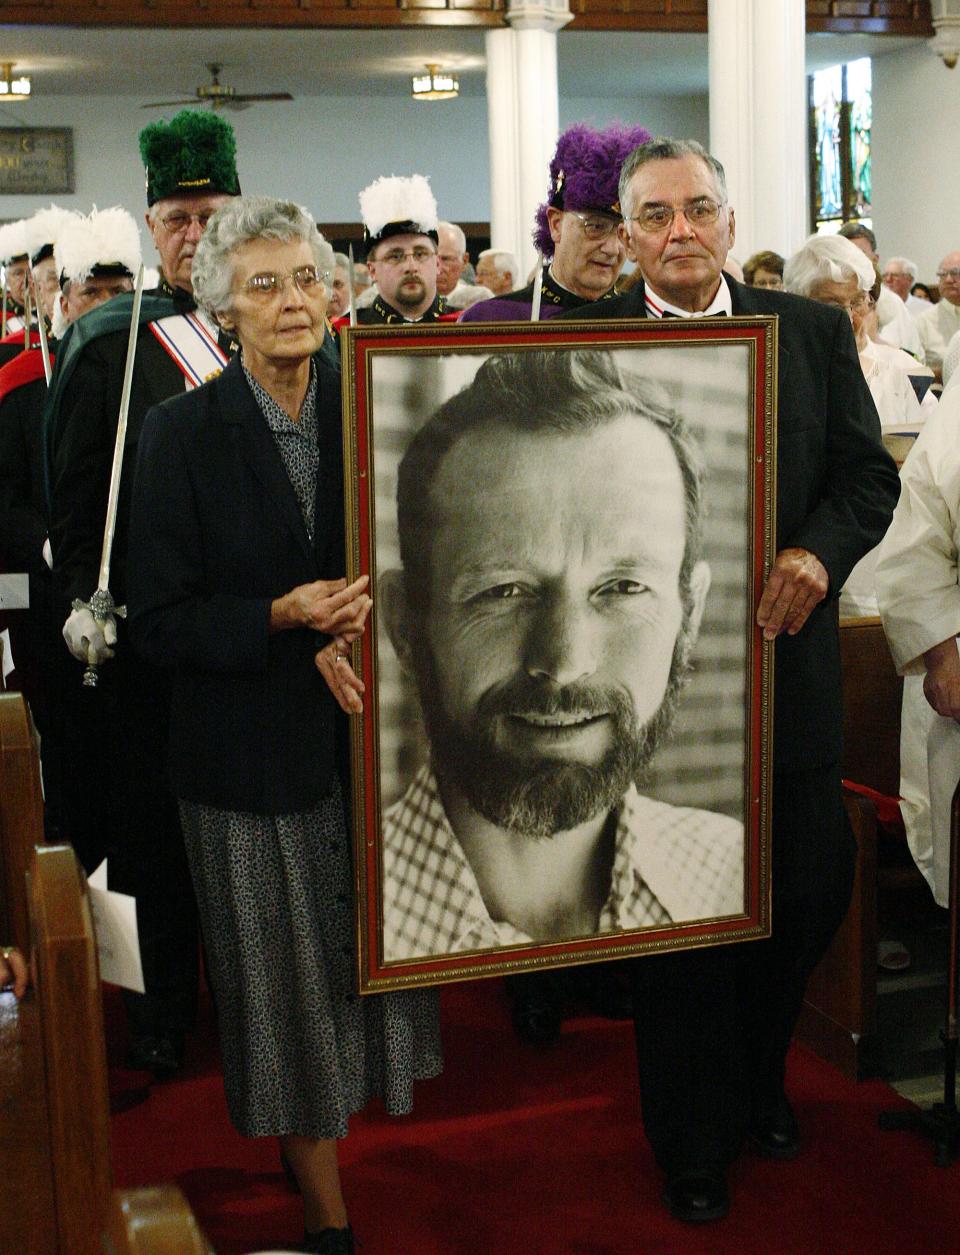 Sister Marita Rother, left, and Tom Rother, right, carry a framed photograph of their brother, Father Stanley Rother, at a mass in honor of his memory in 2006.